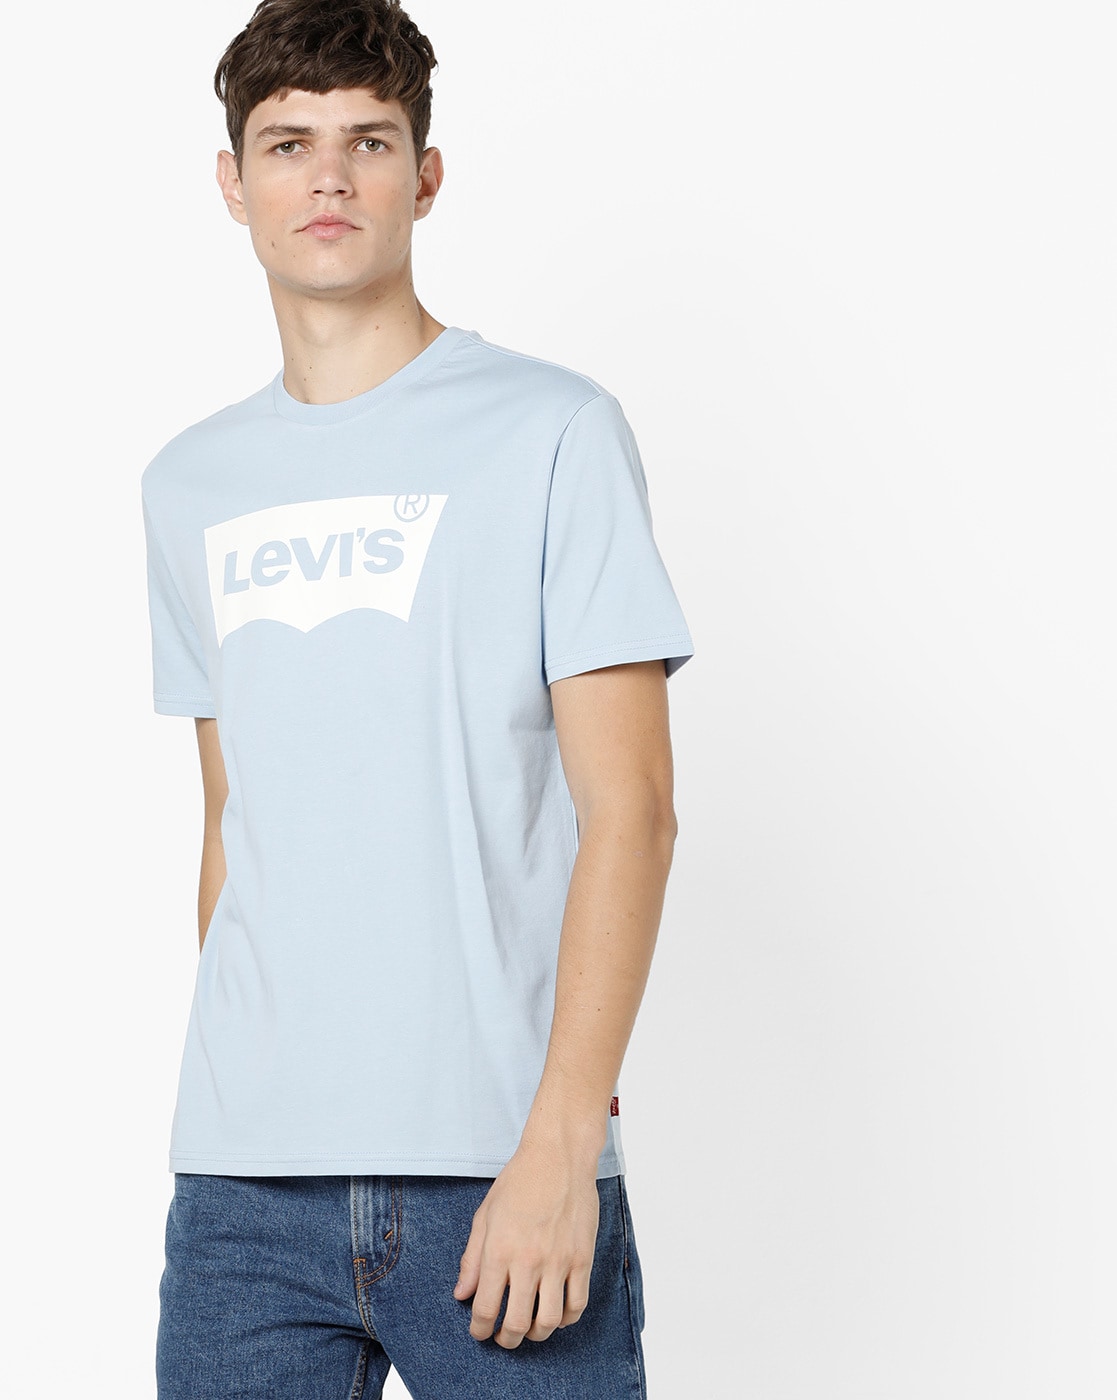 Buy Light Blue Tshirts for Men by LEVIS 